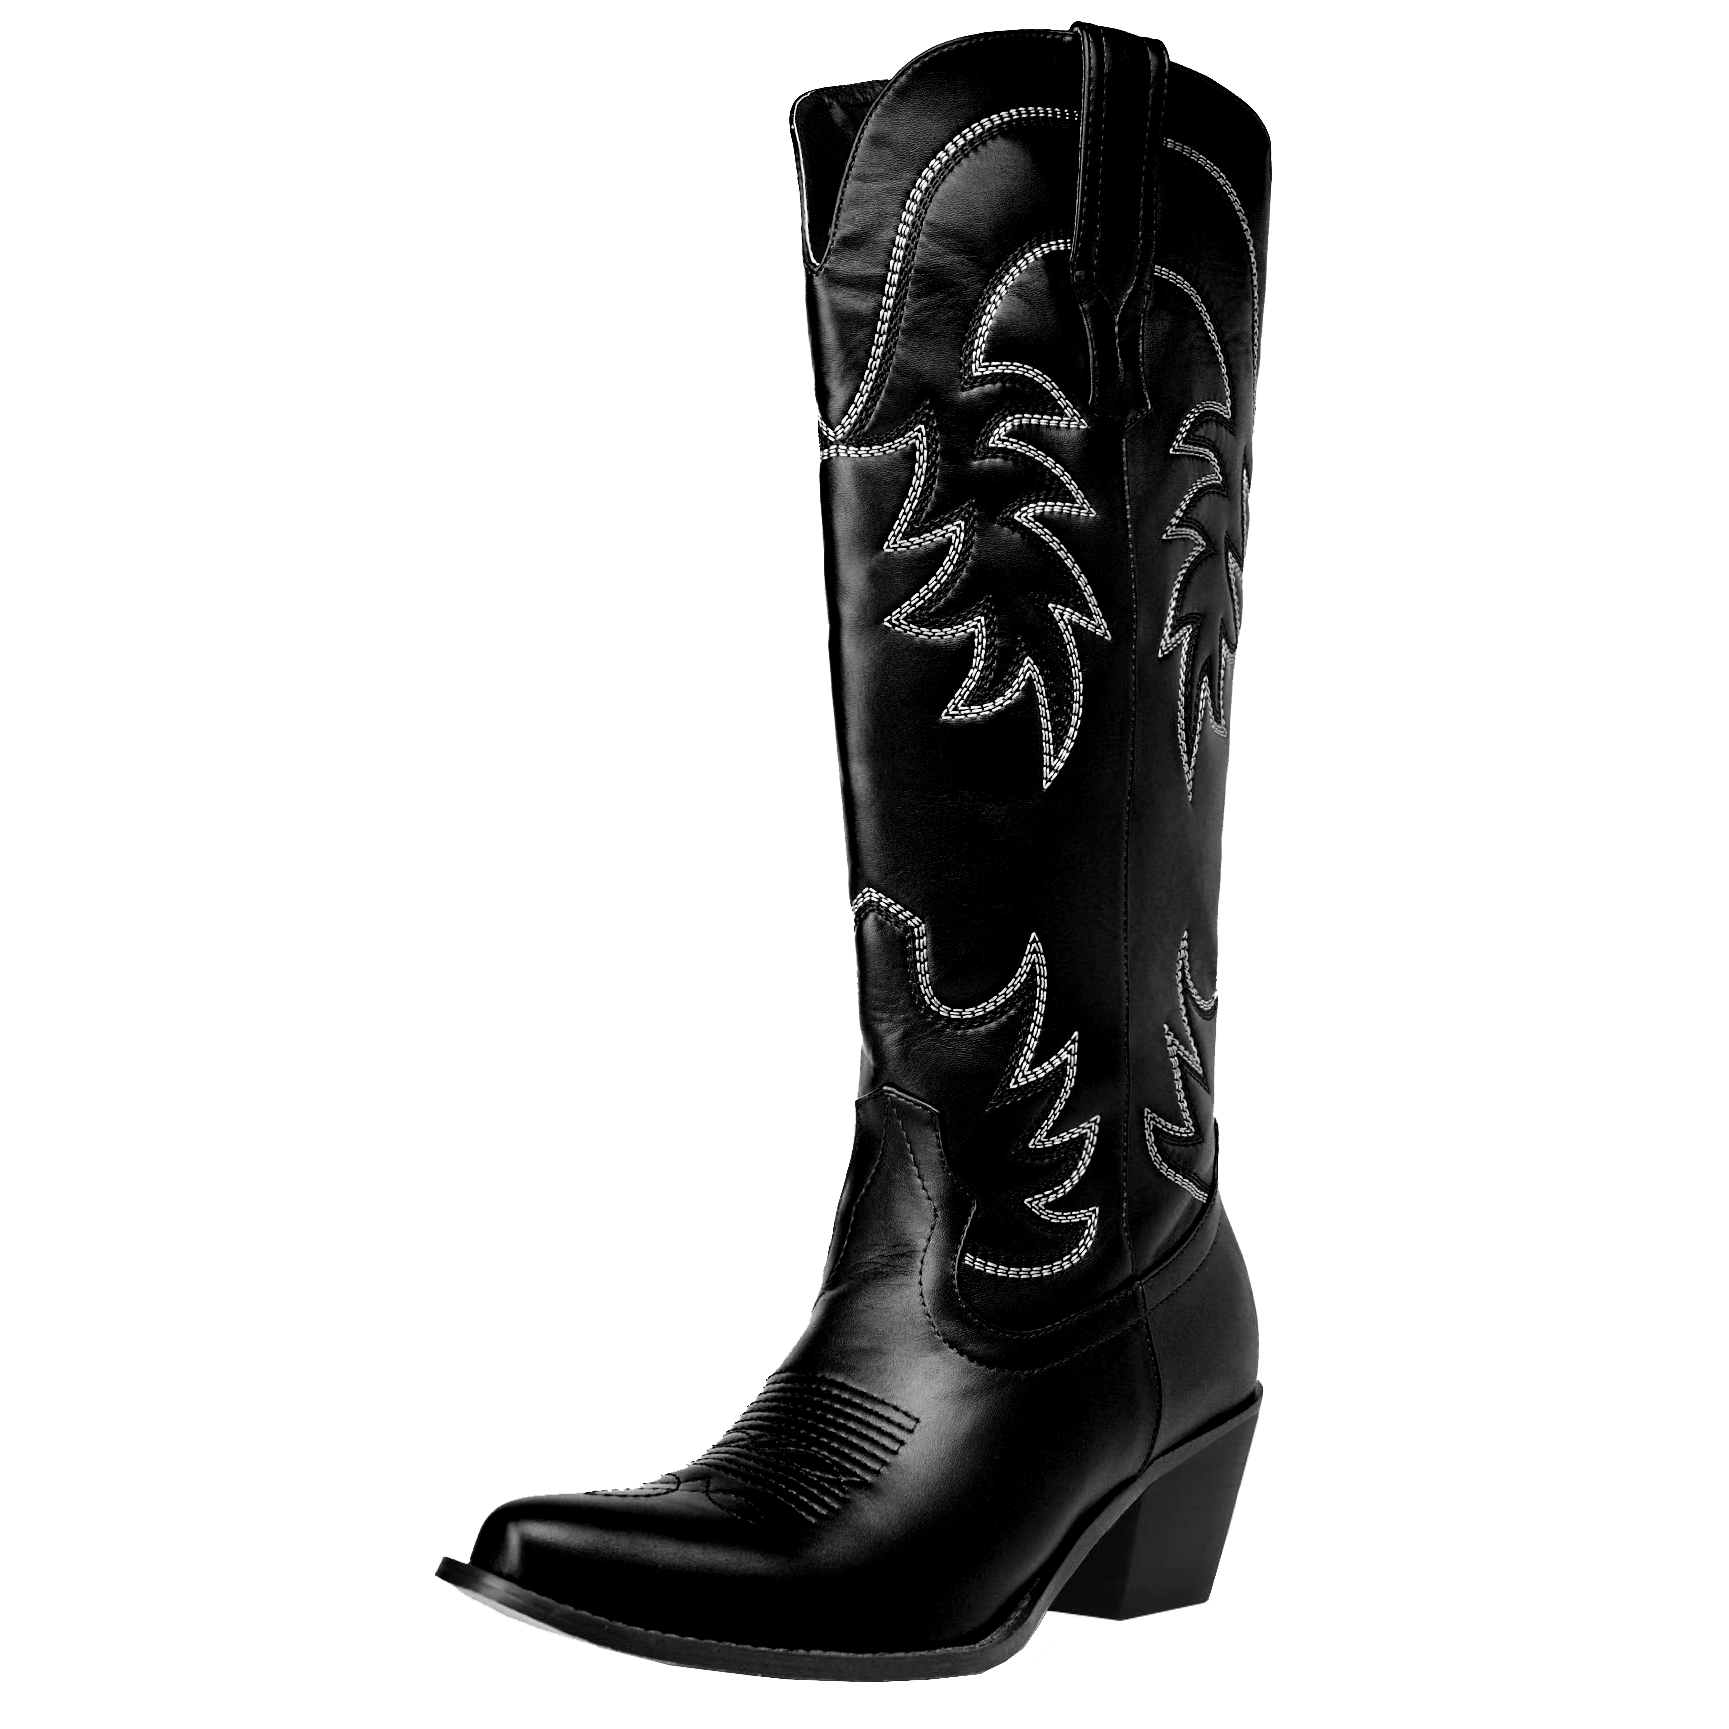 Embroidered Western Cowgirl Knee High Cowboy Boots